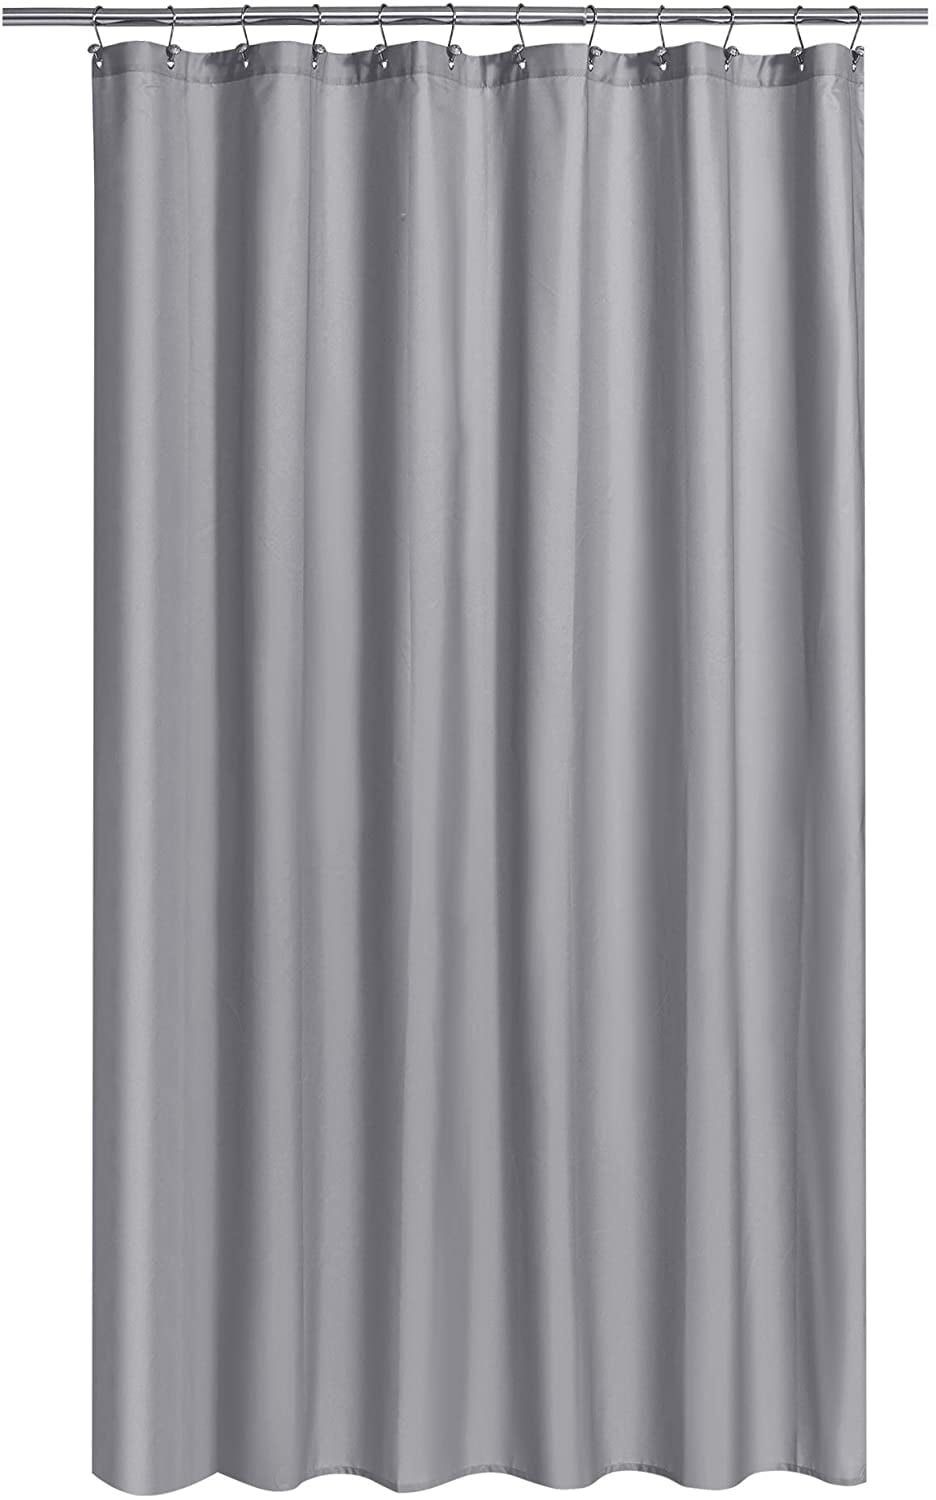 Fabric Shower Curtain Or Liner Extra, 84 Inch Long Shower Curtains And Liners